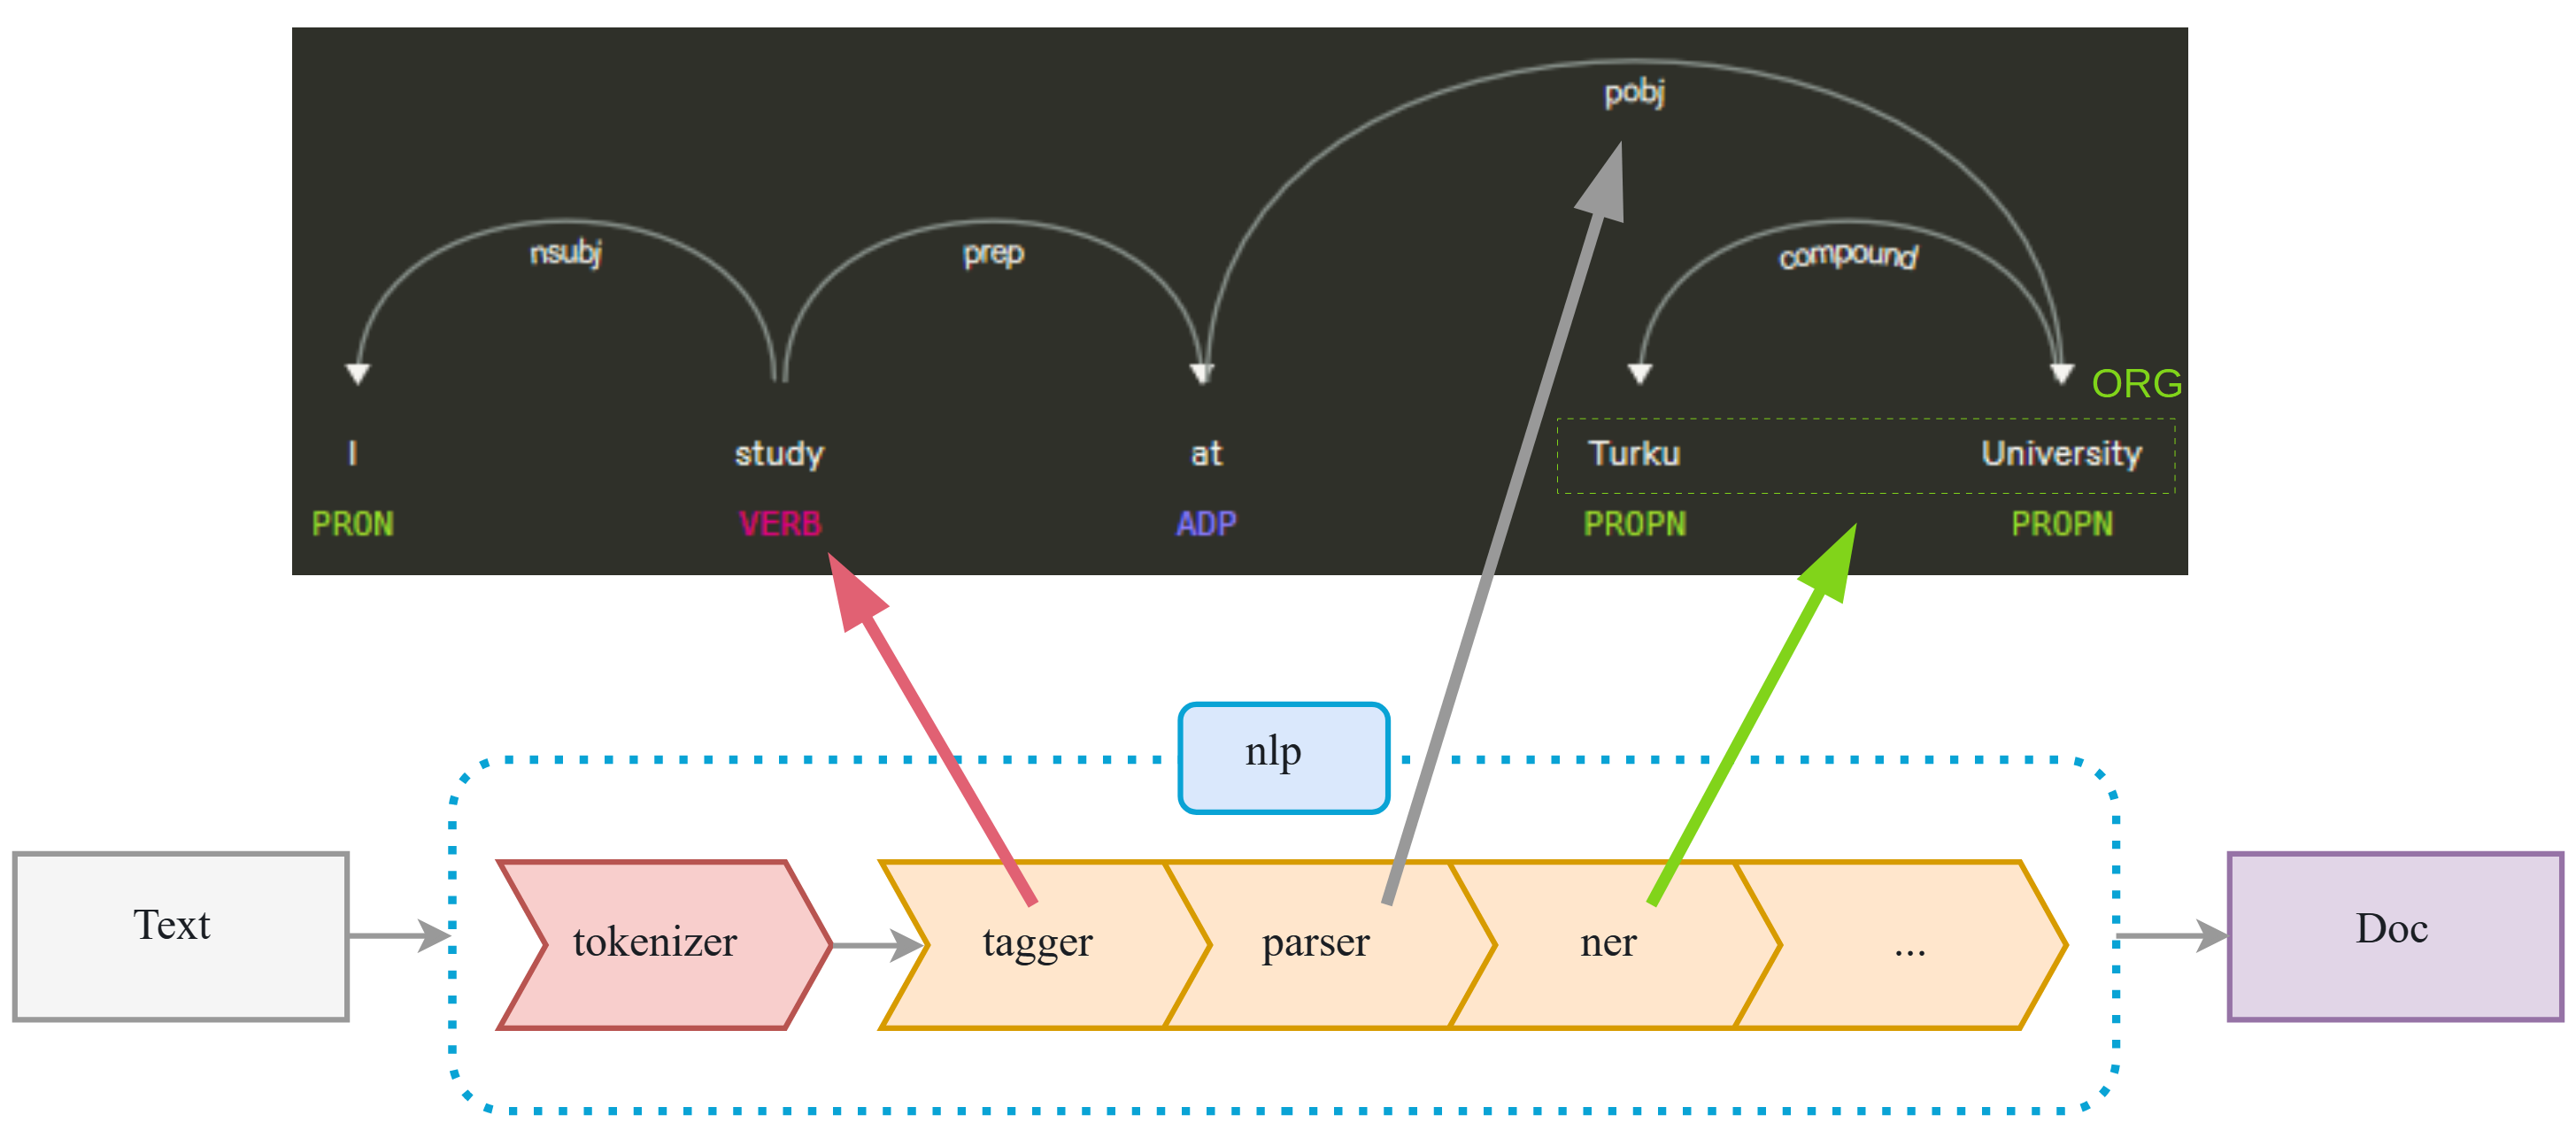 A diagram showing how a spaCy pipeline consists of several components running in sequence: e.g. first a tagger, then a parser, then NER.